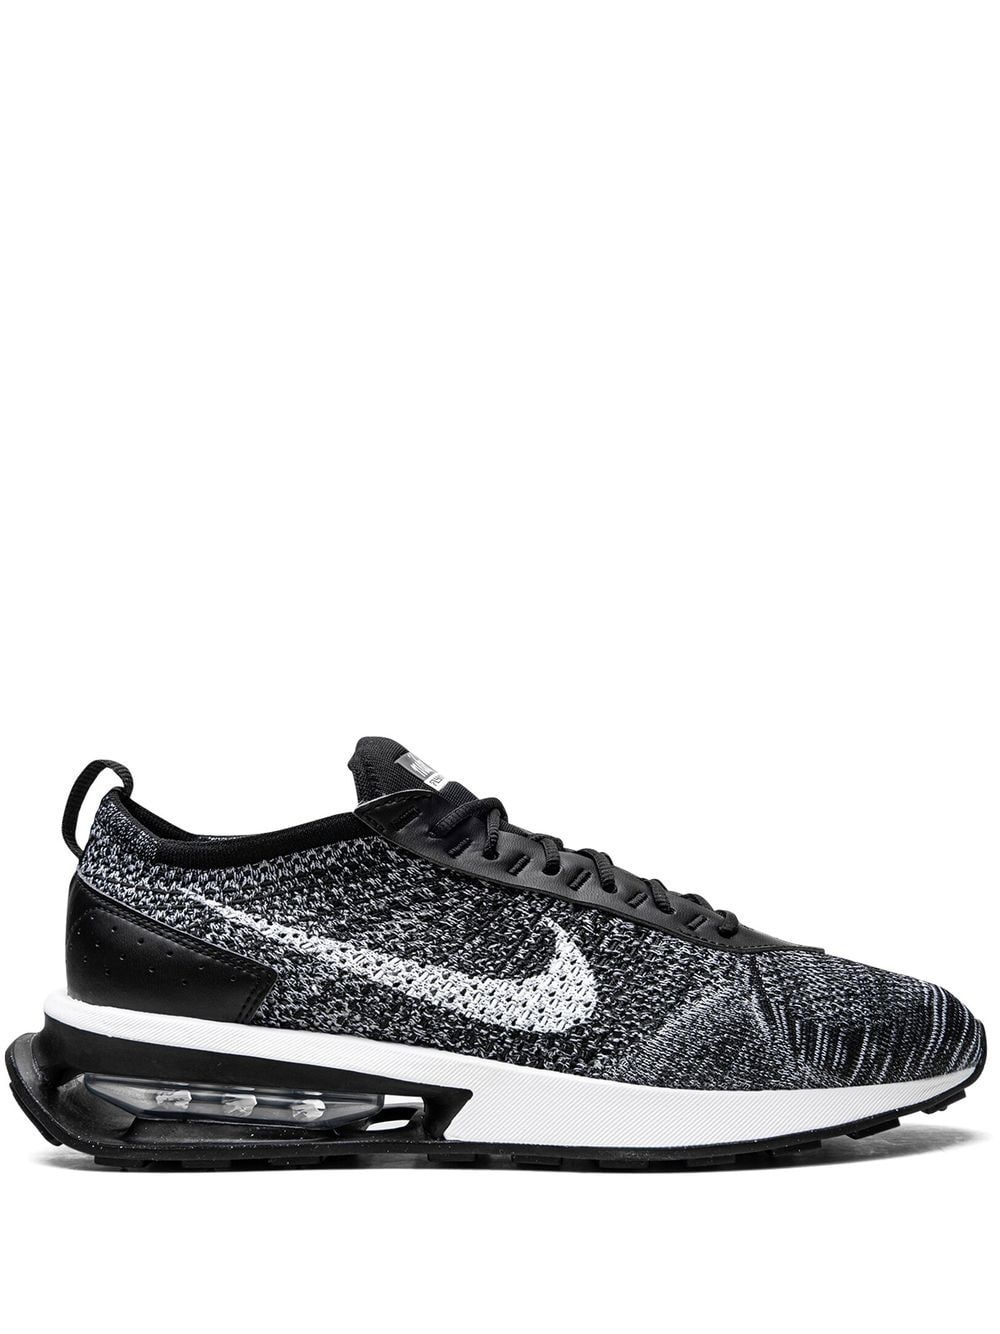 Air Max Flyknit Racer "Oreo" sneakers - 1